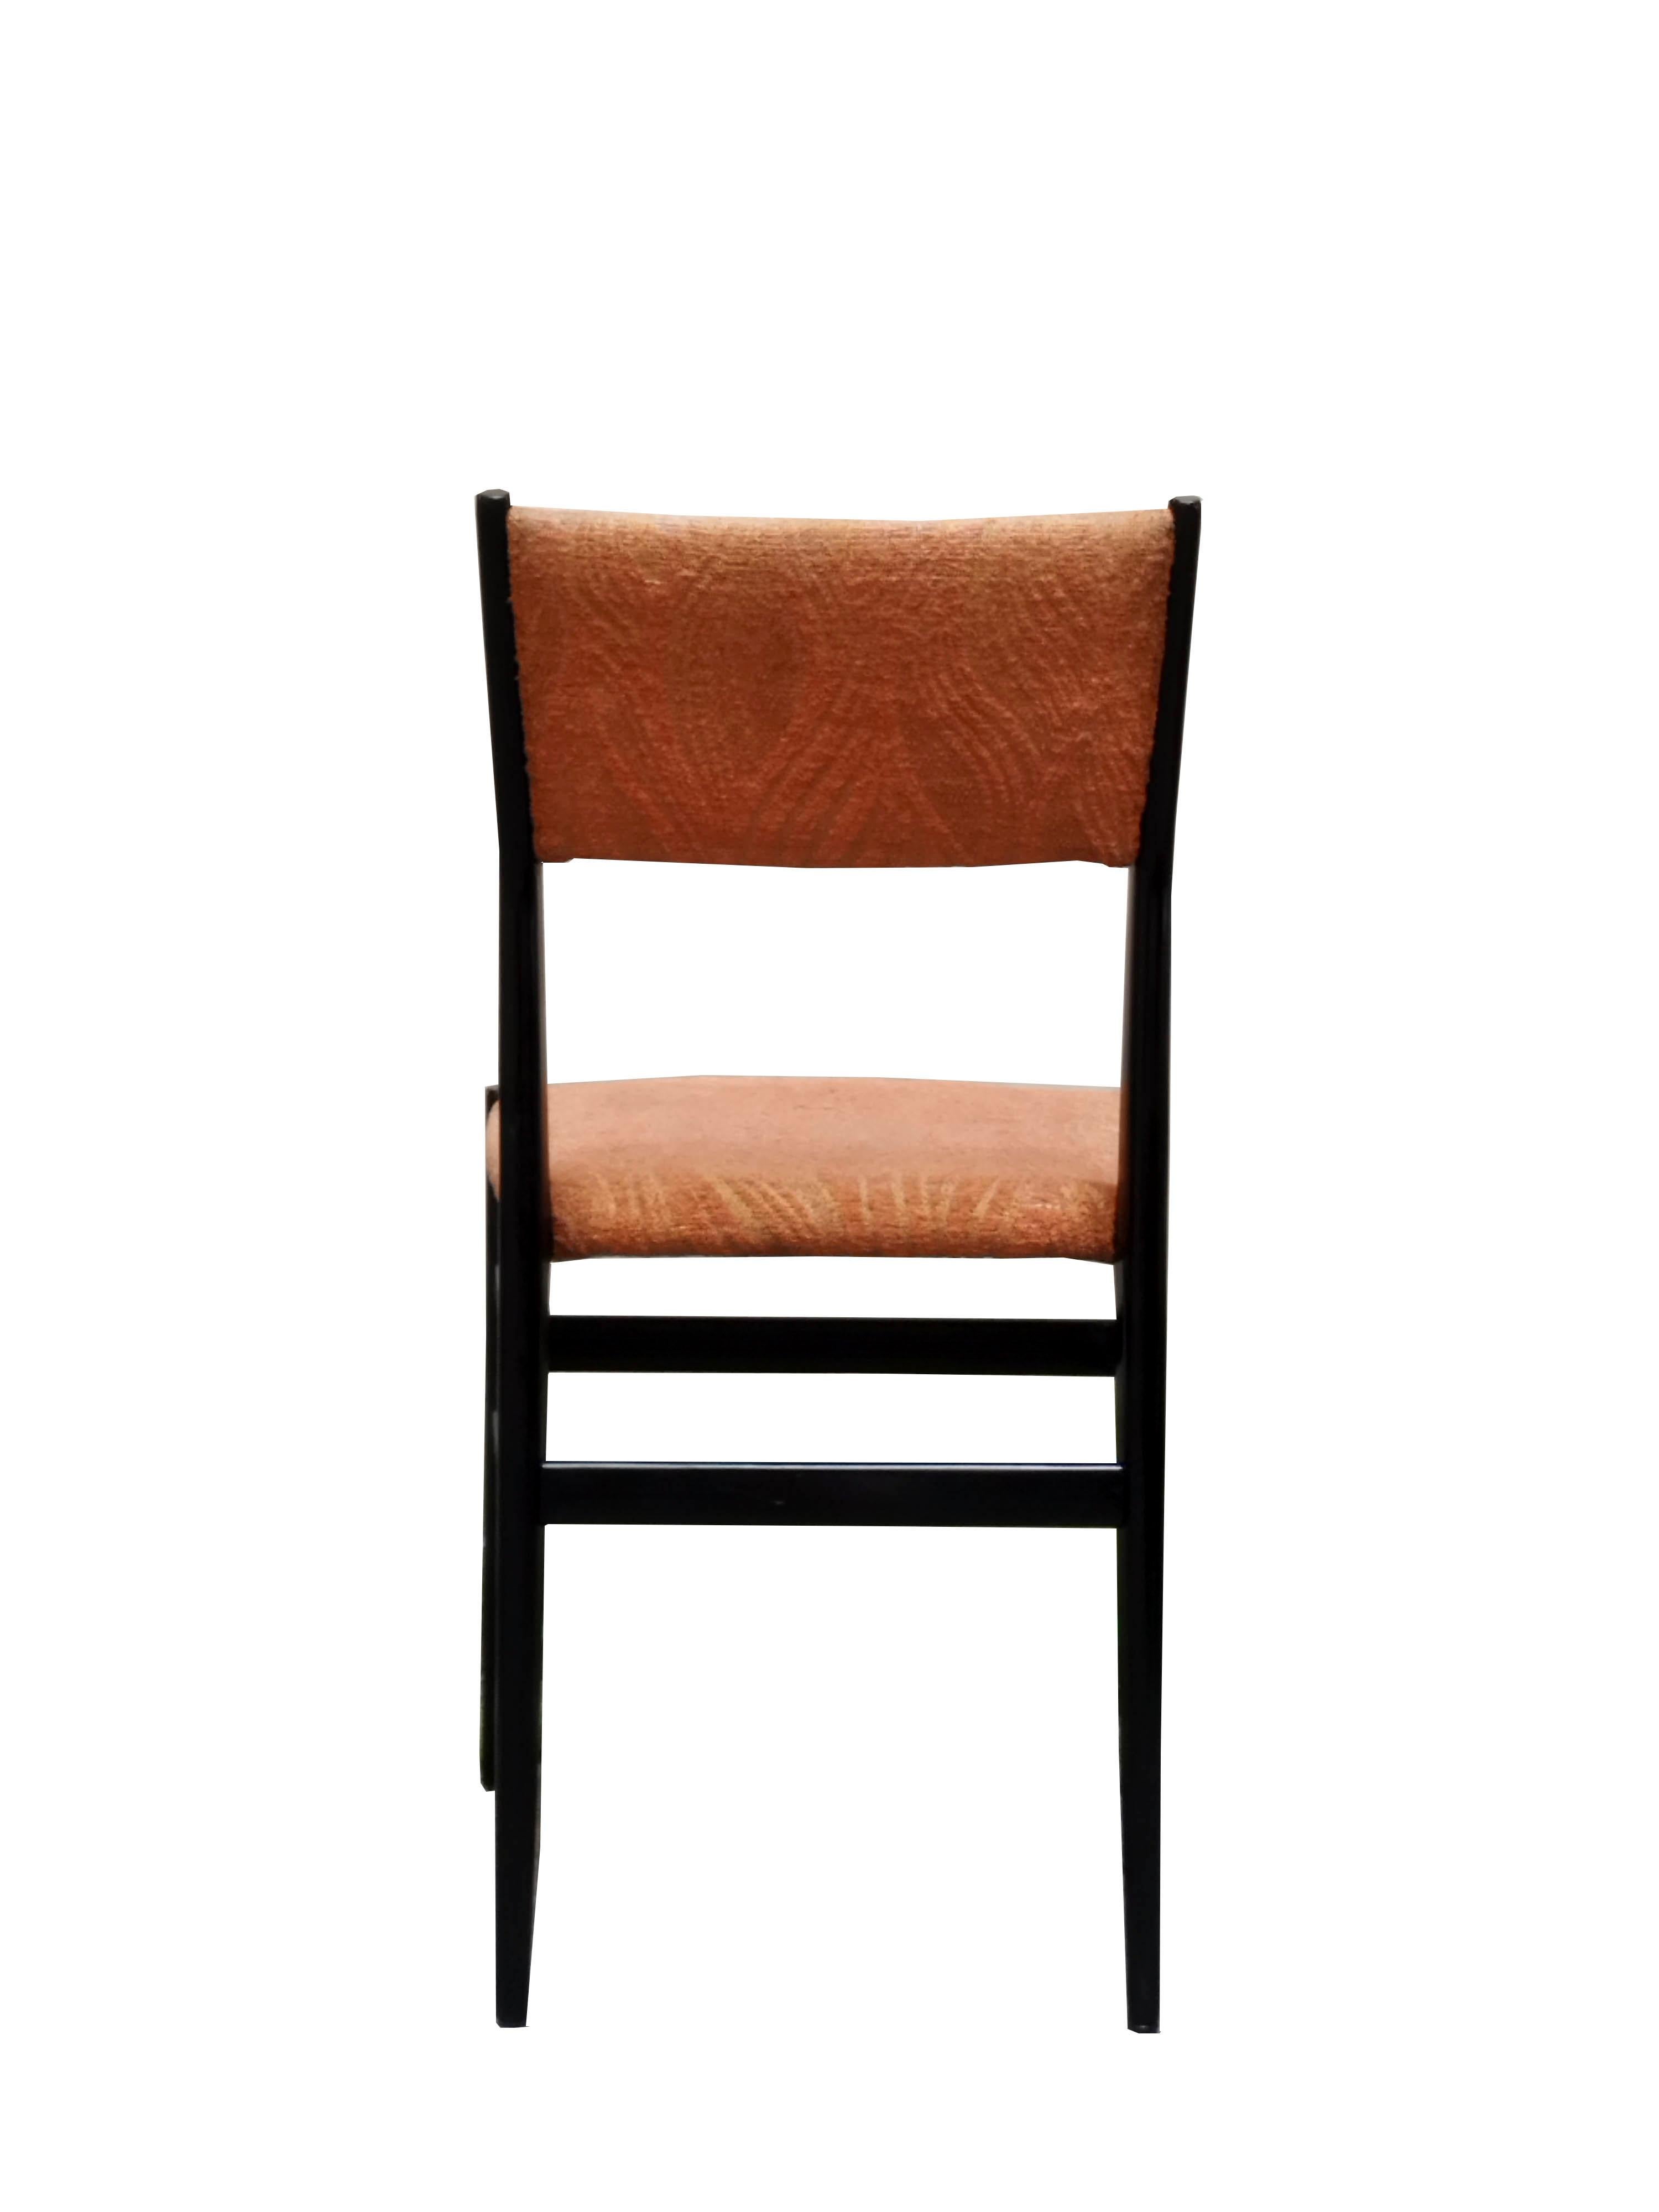 Mid-20th Century Gio Ponti for Cassina Set of 6 Leggera Chairs, Italy, 1950s For Sale